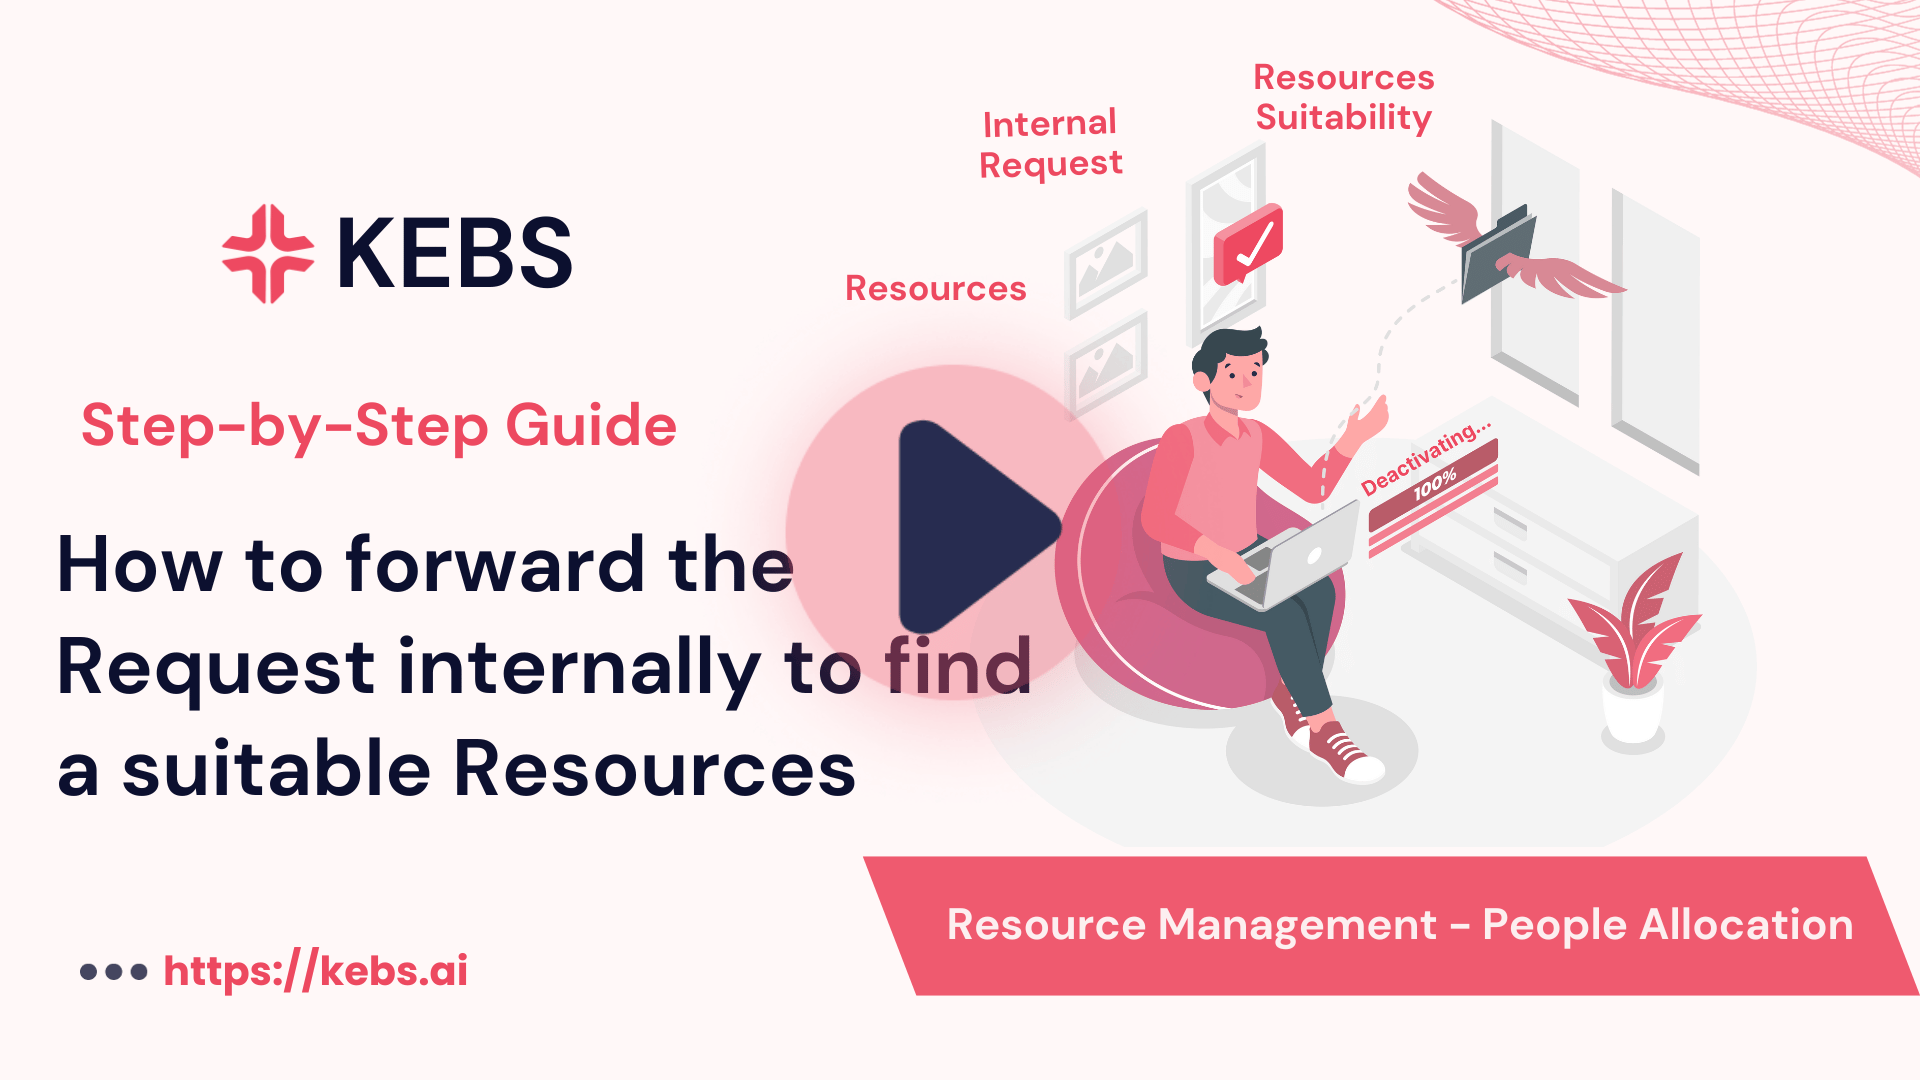 How to forward the Request internally to find a suitable Resources